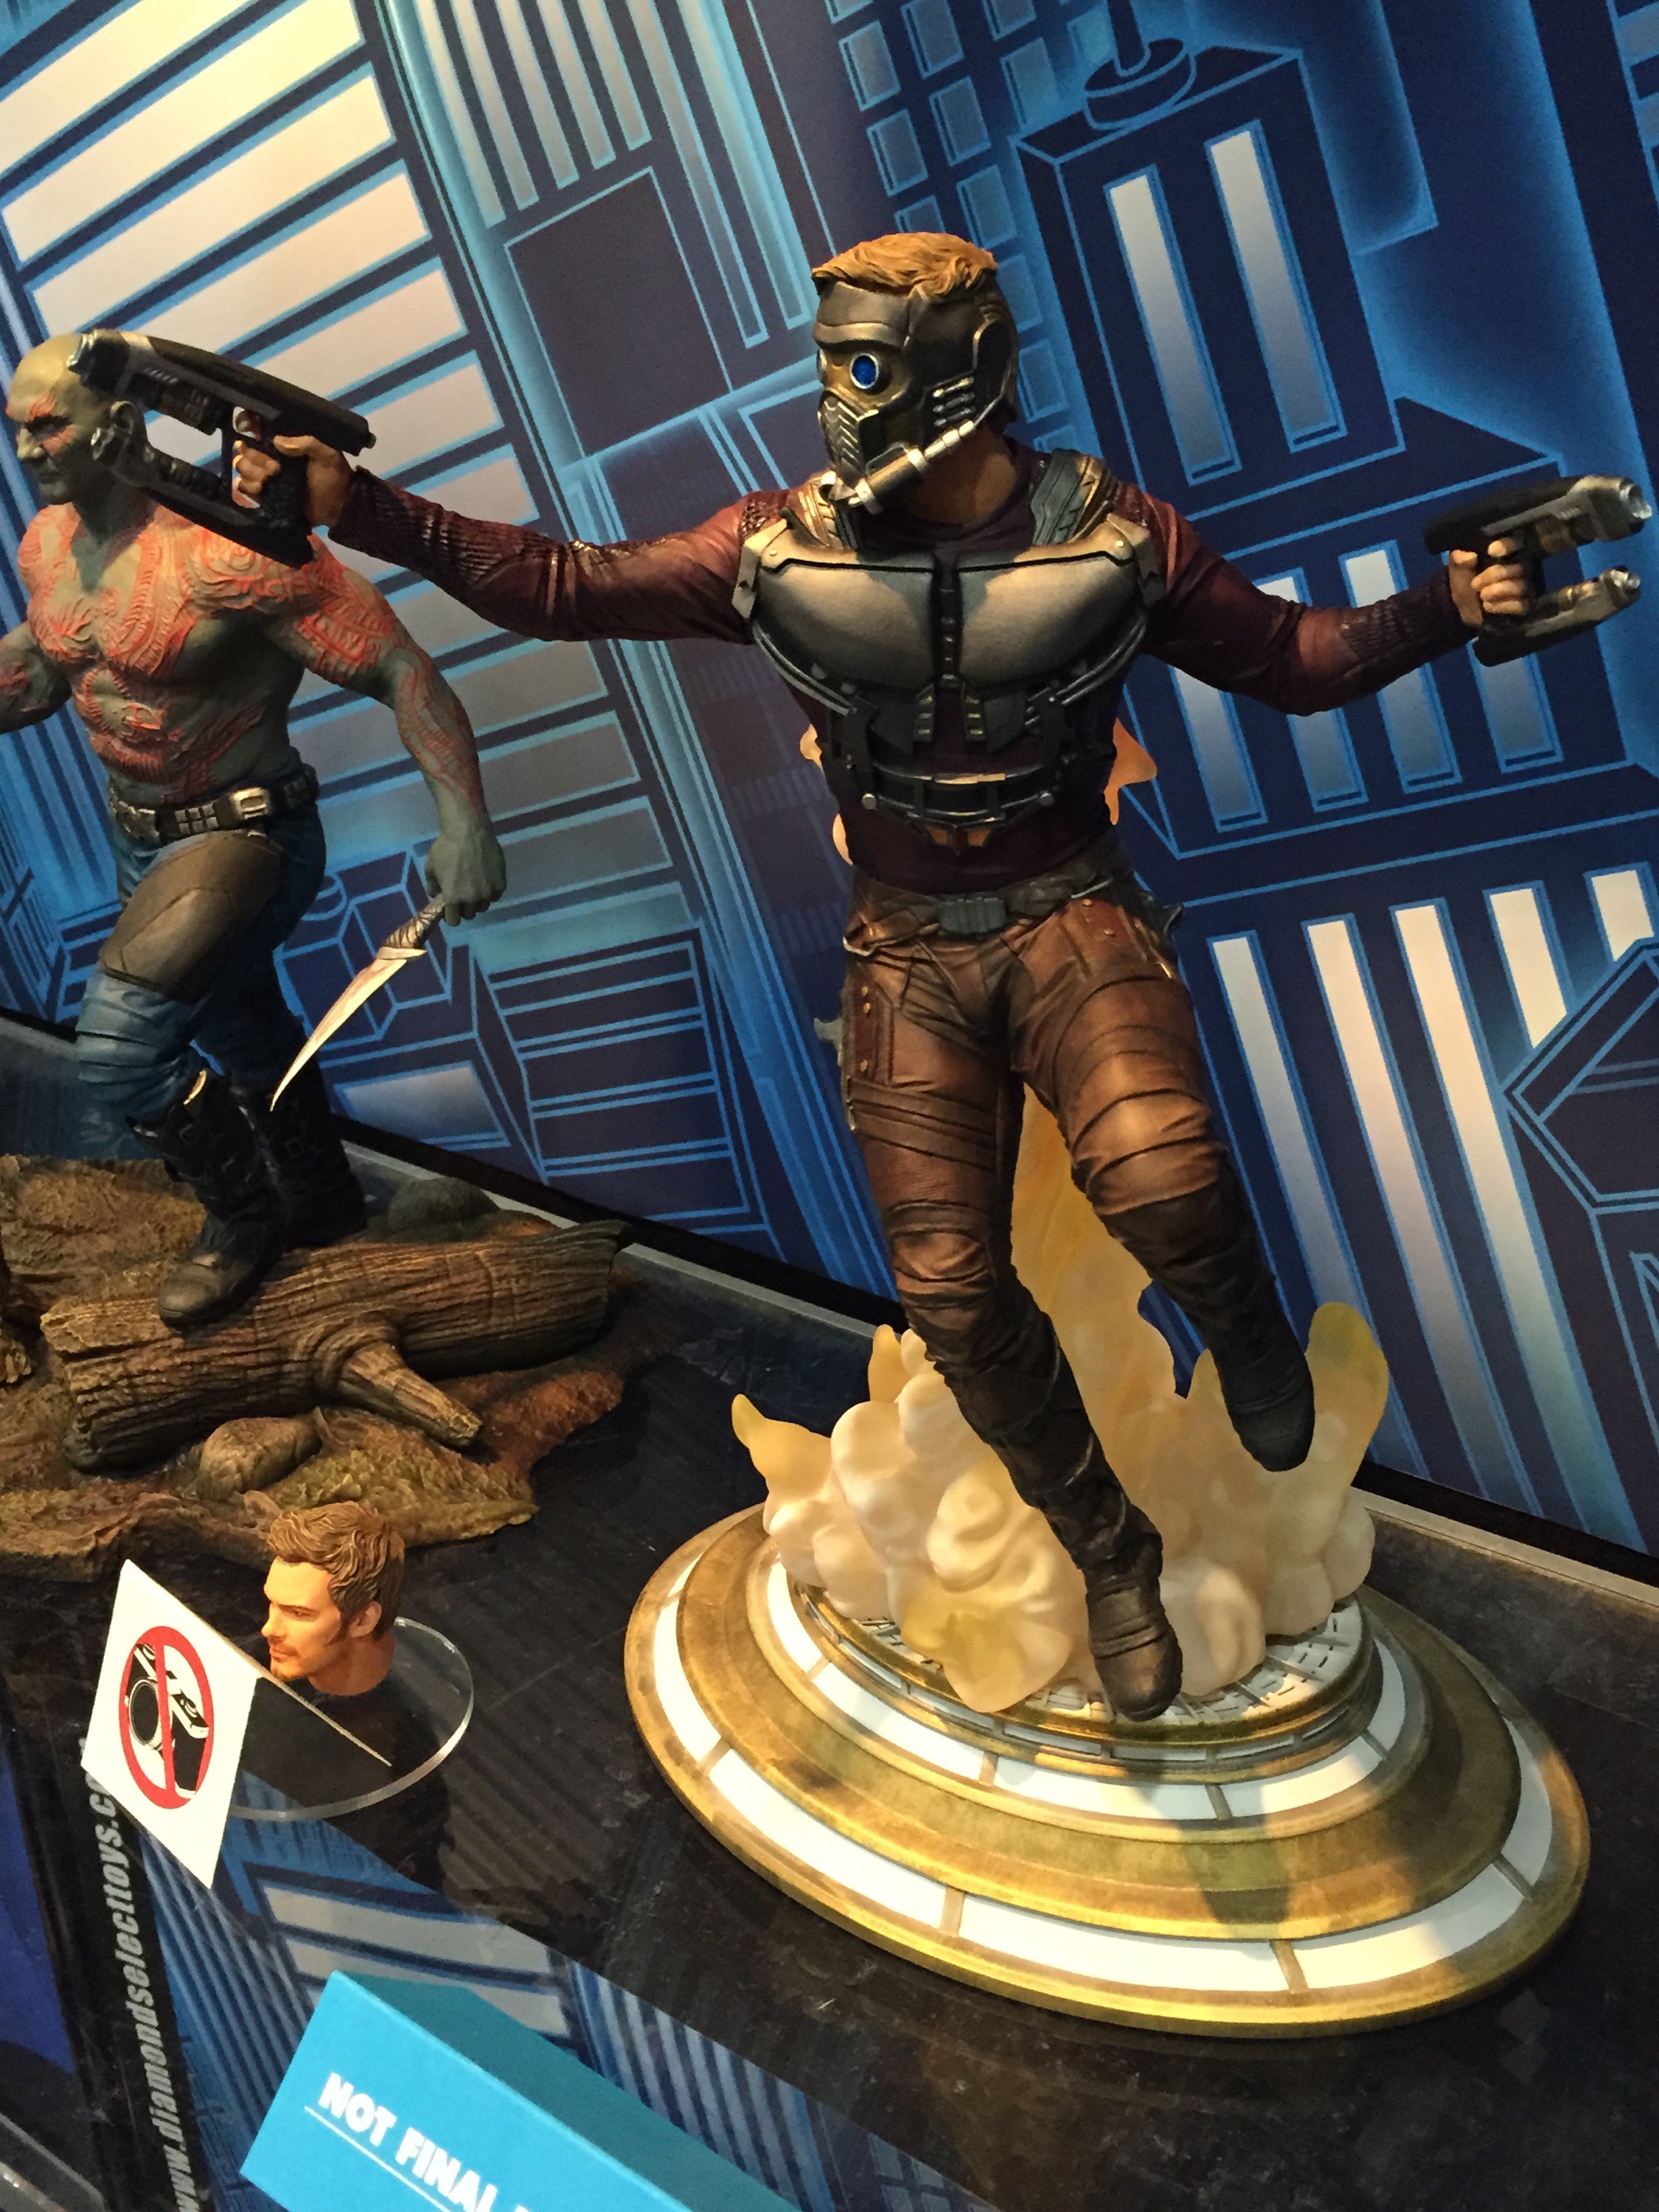 Marvel Guardians Of The Galaxy Vol. 2 - Star-Lord Collectors Gallery Statue